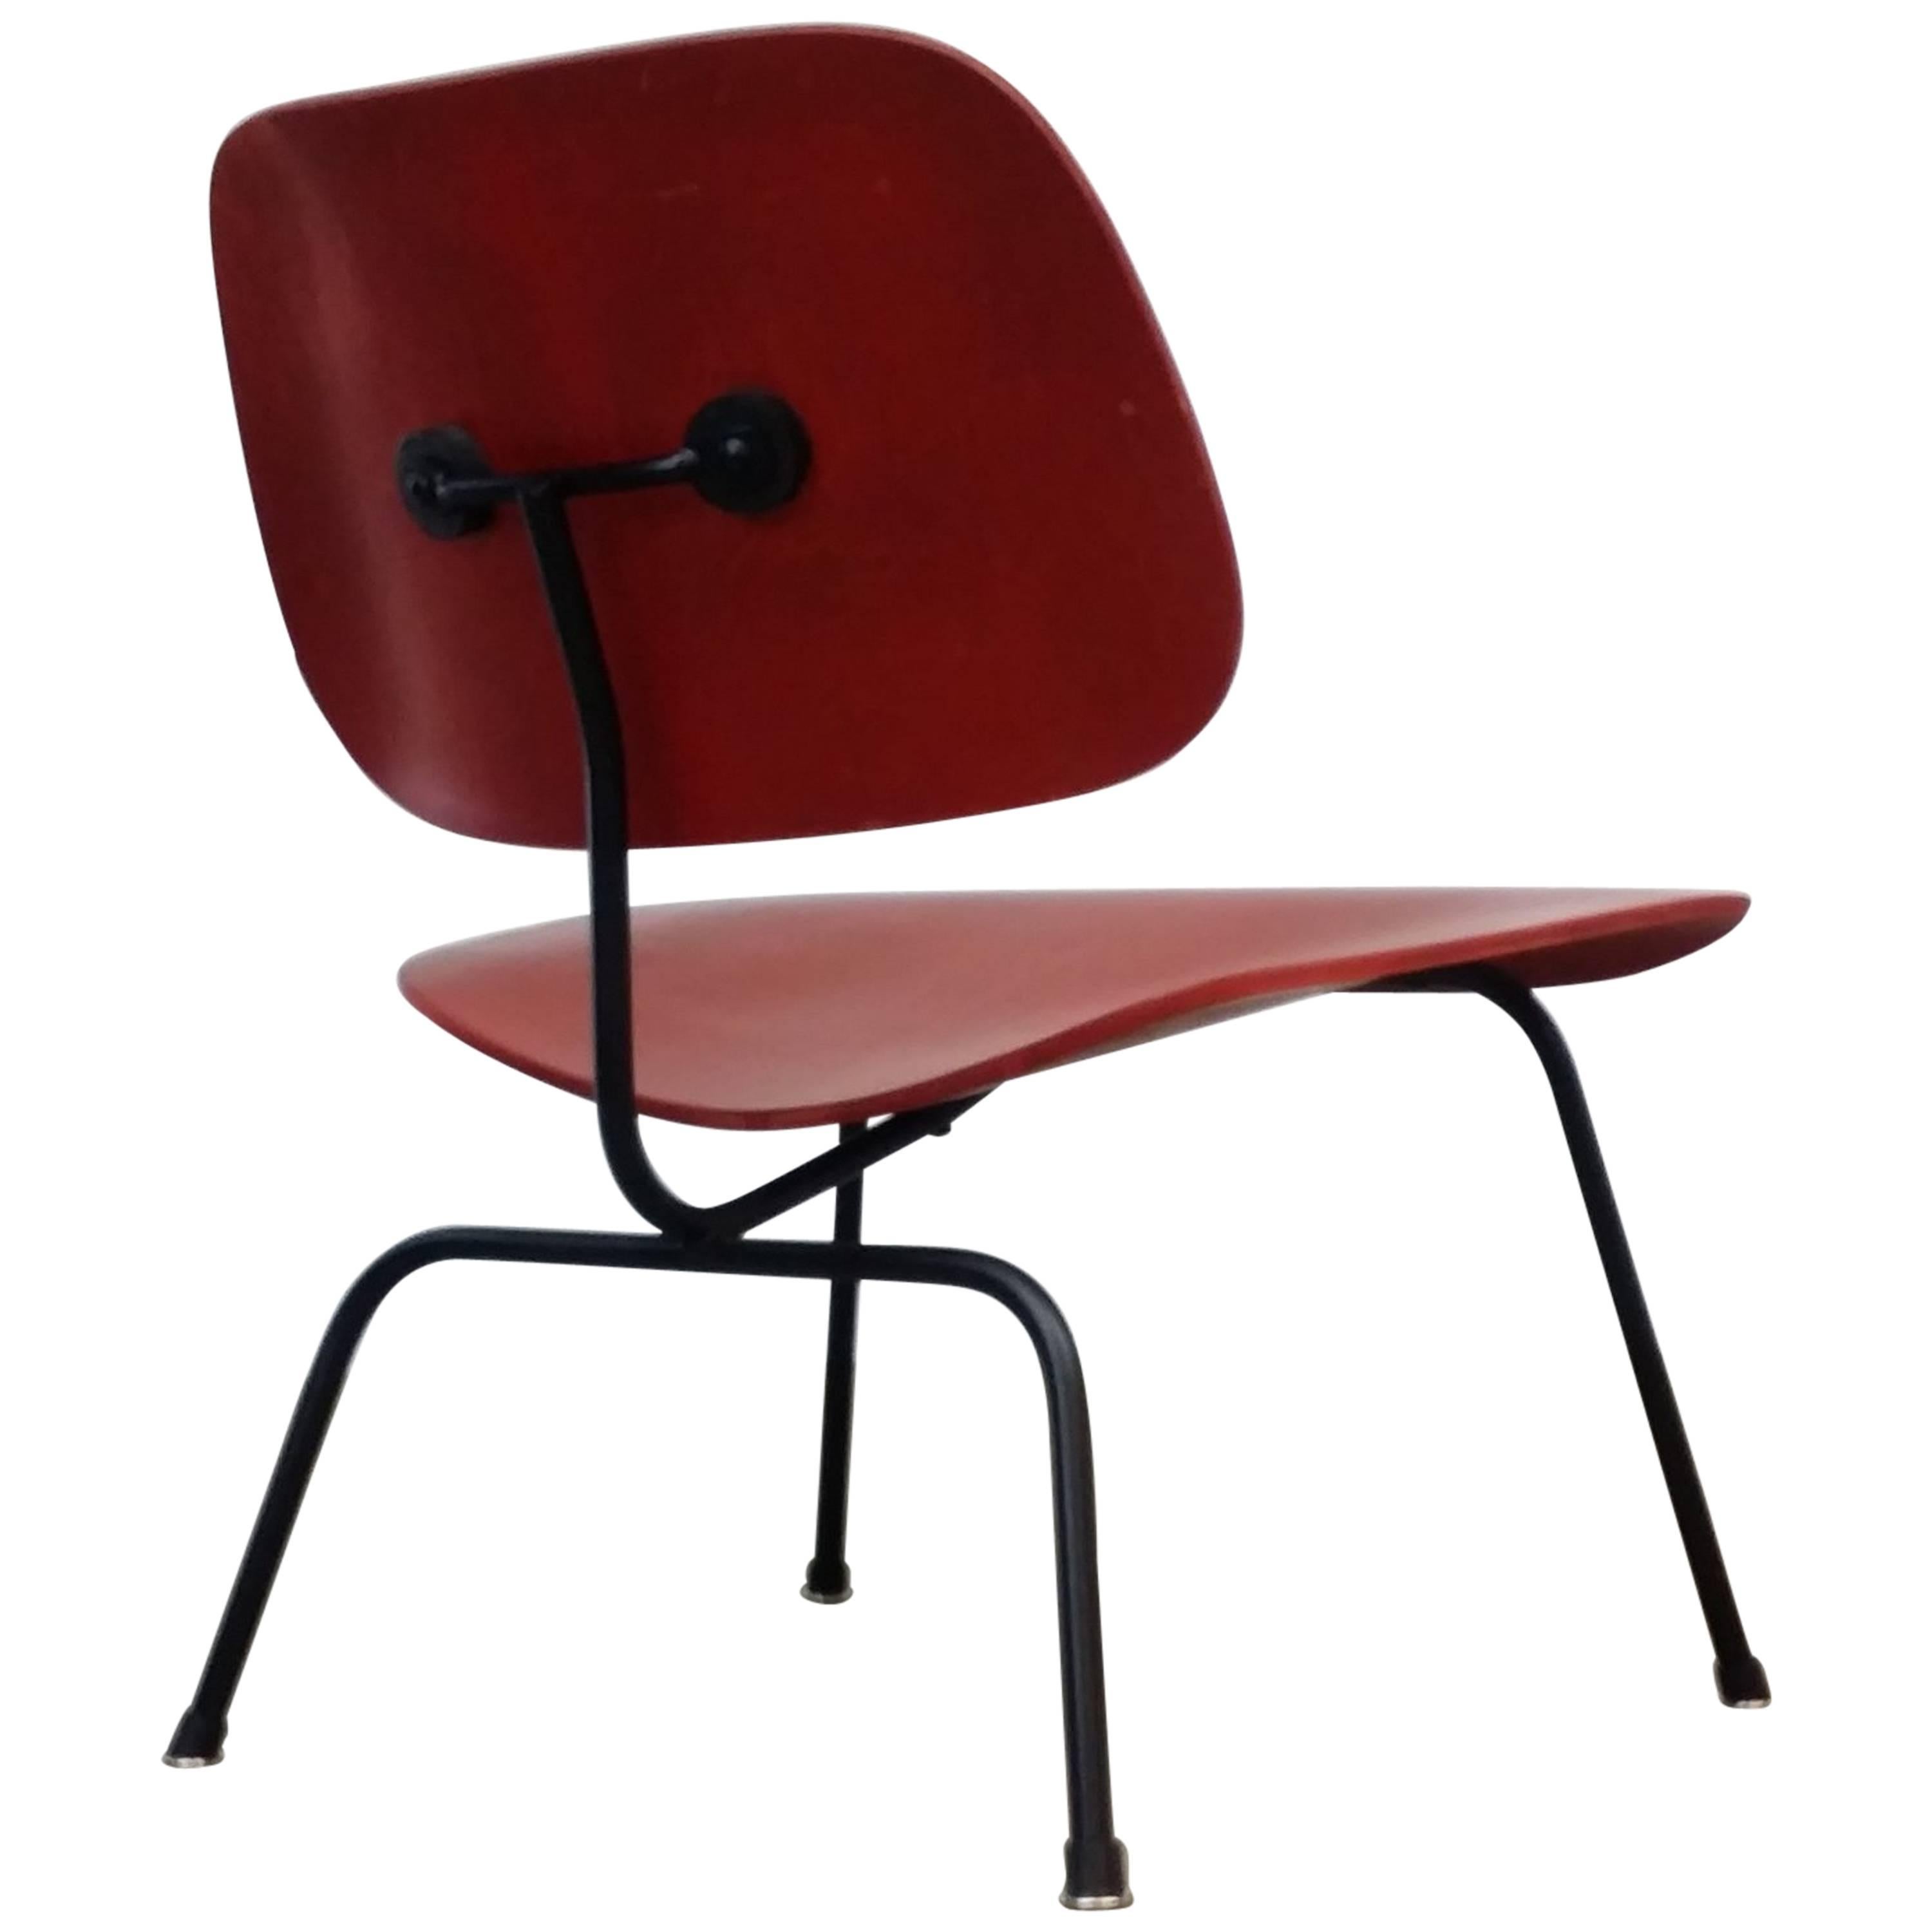 Fully Restored Early Red Aniline Dye Eames LCM